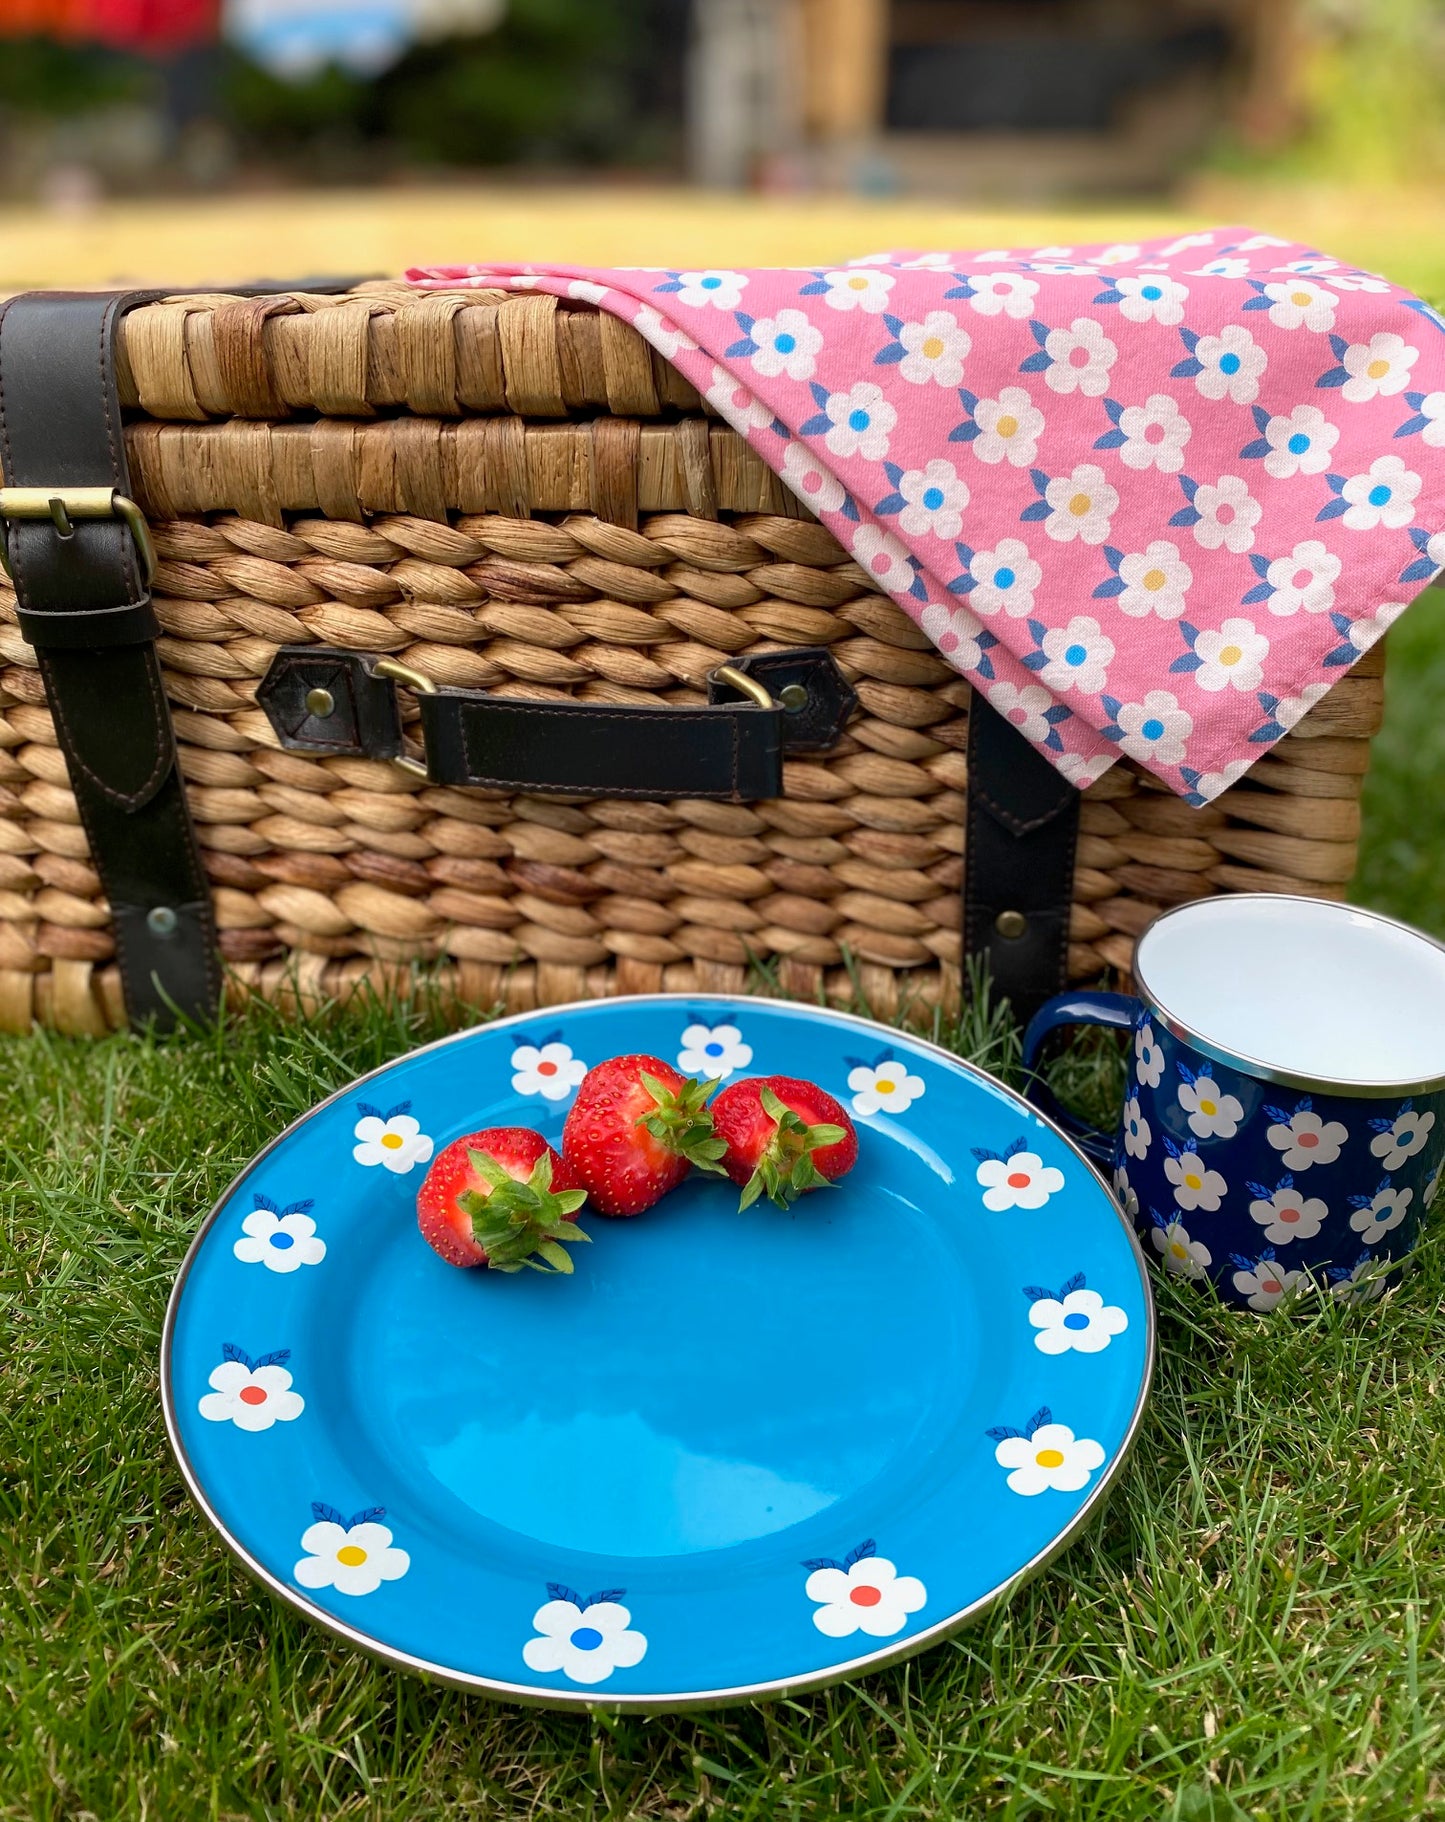 Beautiful enamel plates in teal ocean blue. Pretty, durable AND practical, they have a pretty flower design and steel rim around the edge. Camping in style! Photo shows pretty picnic set up including rose pink tea towel and our midnight enamel mug.